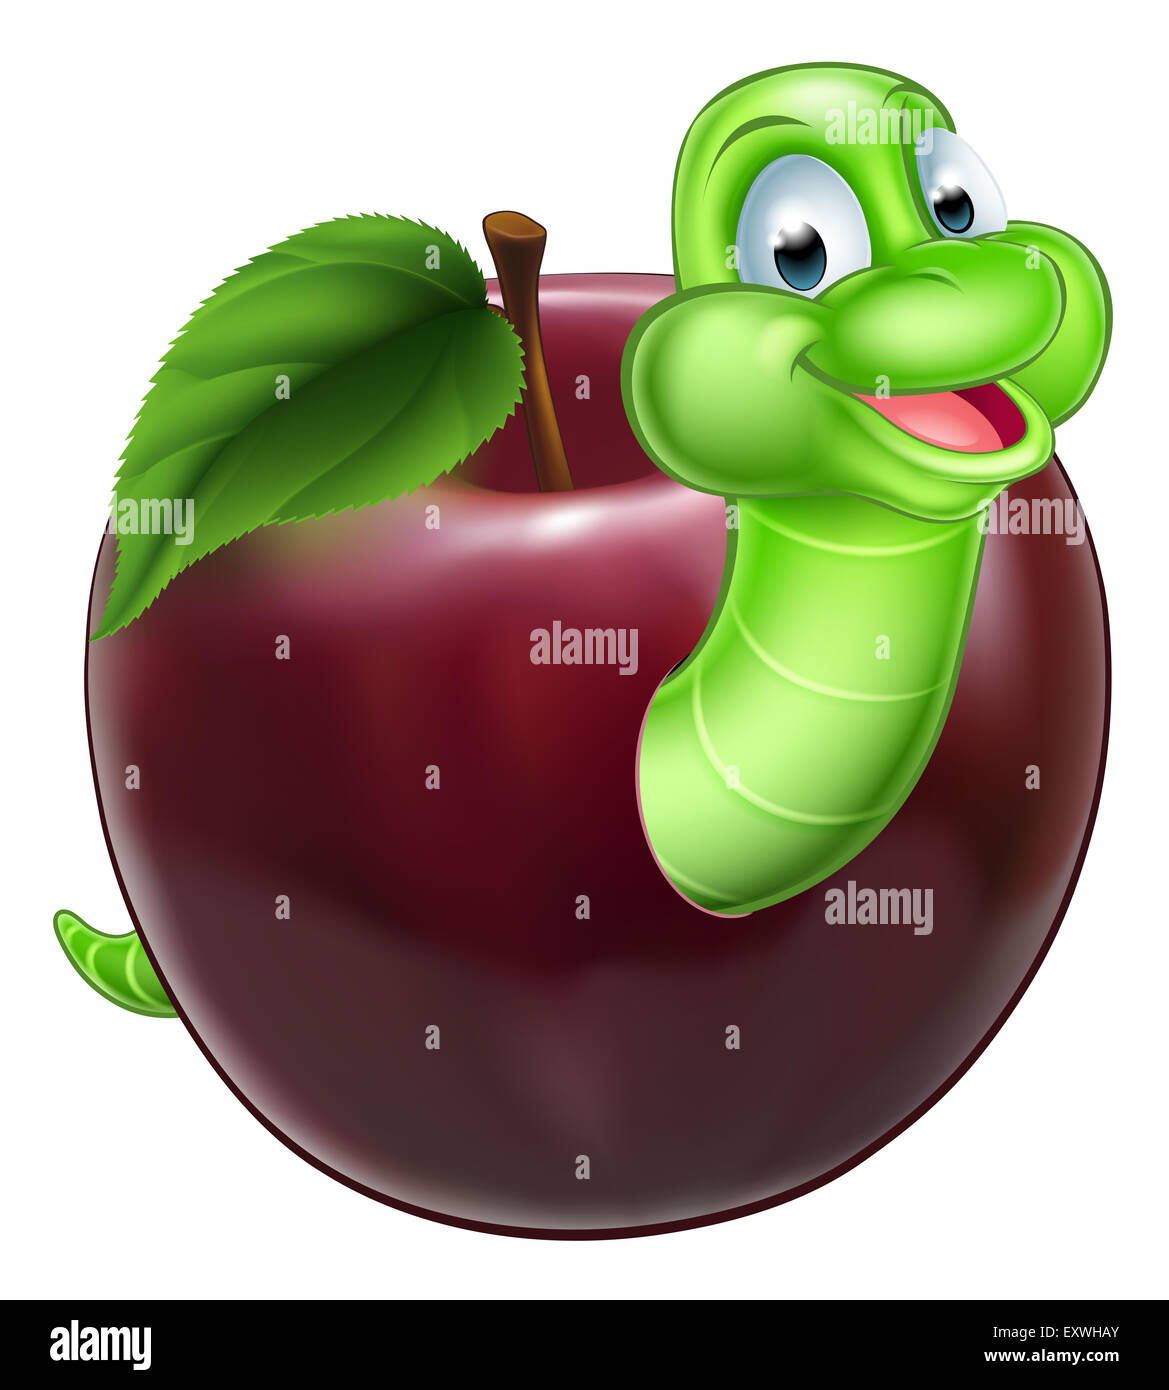 An illustration of a happy cute cartoon green caterpillar worm mascot coming out of an apple Stock Photo